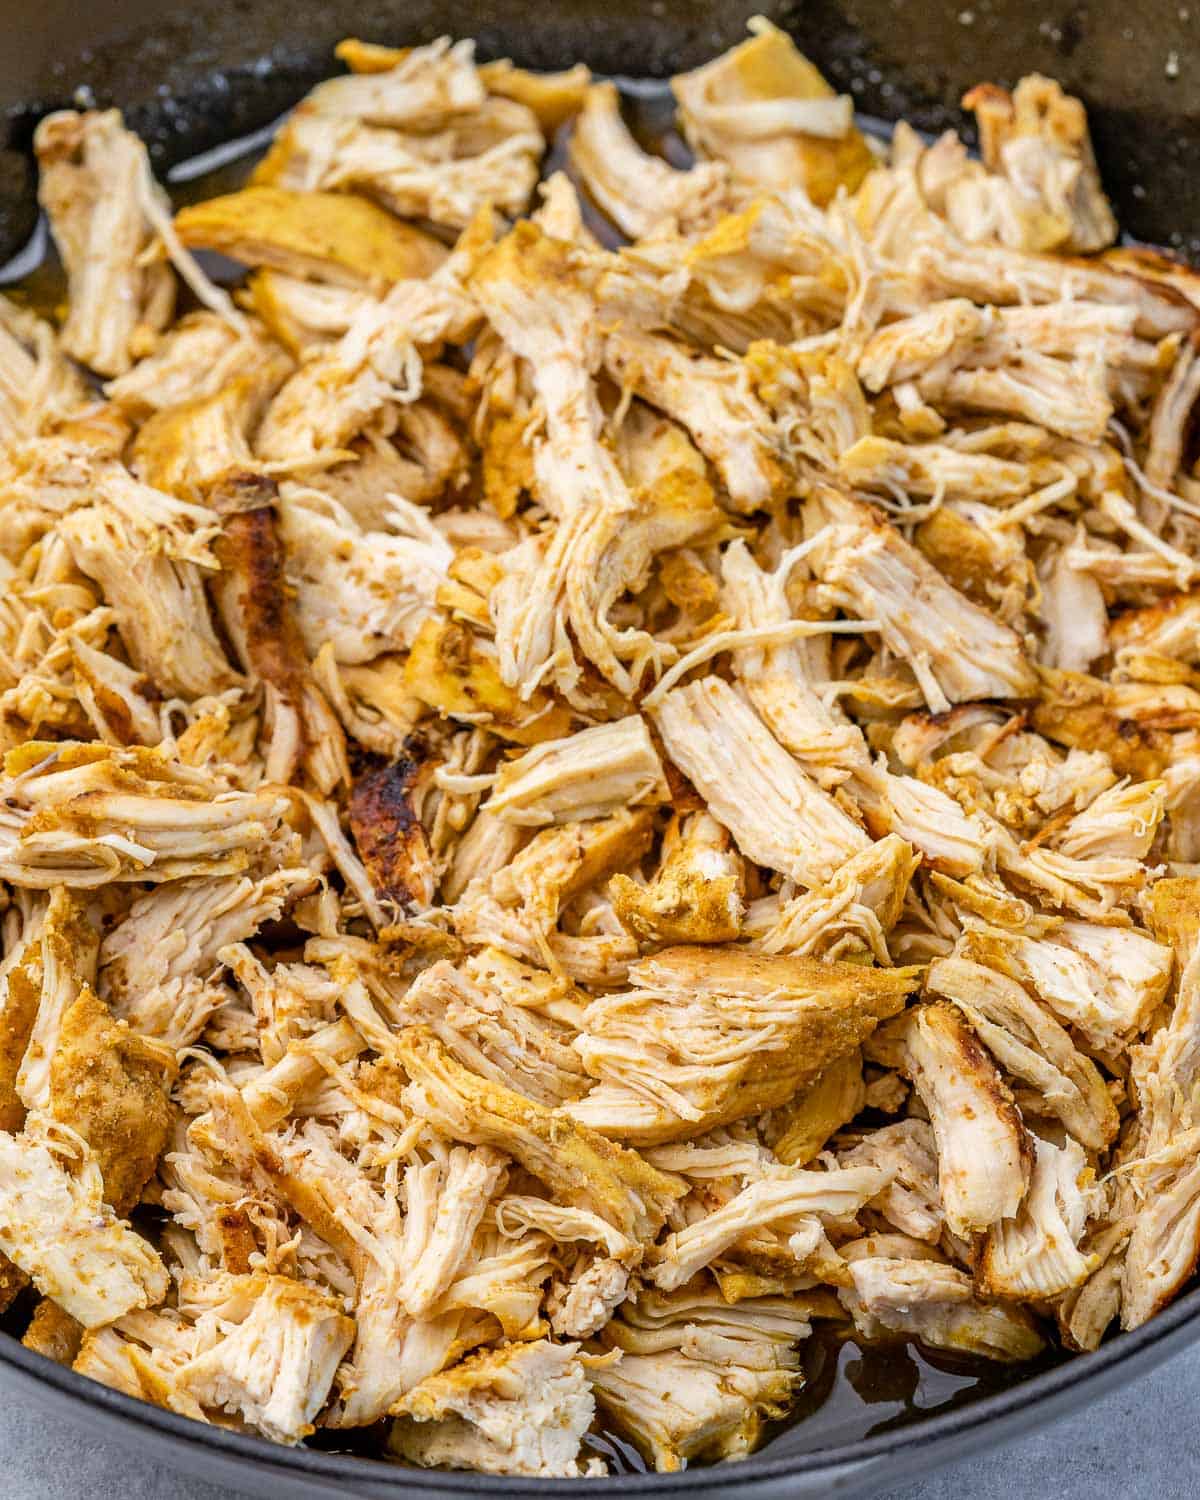 Shredded chicken cooking in a pan.